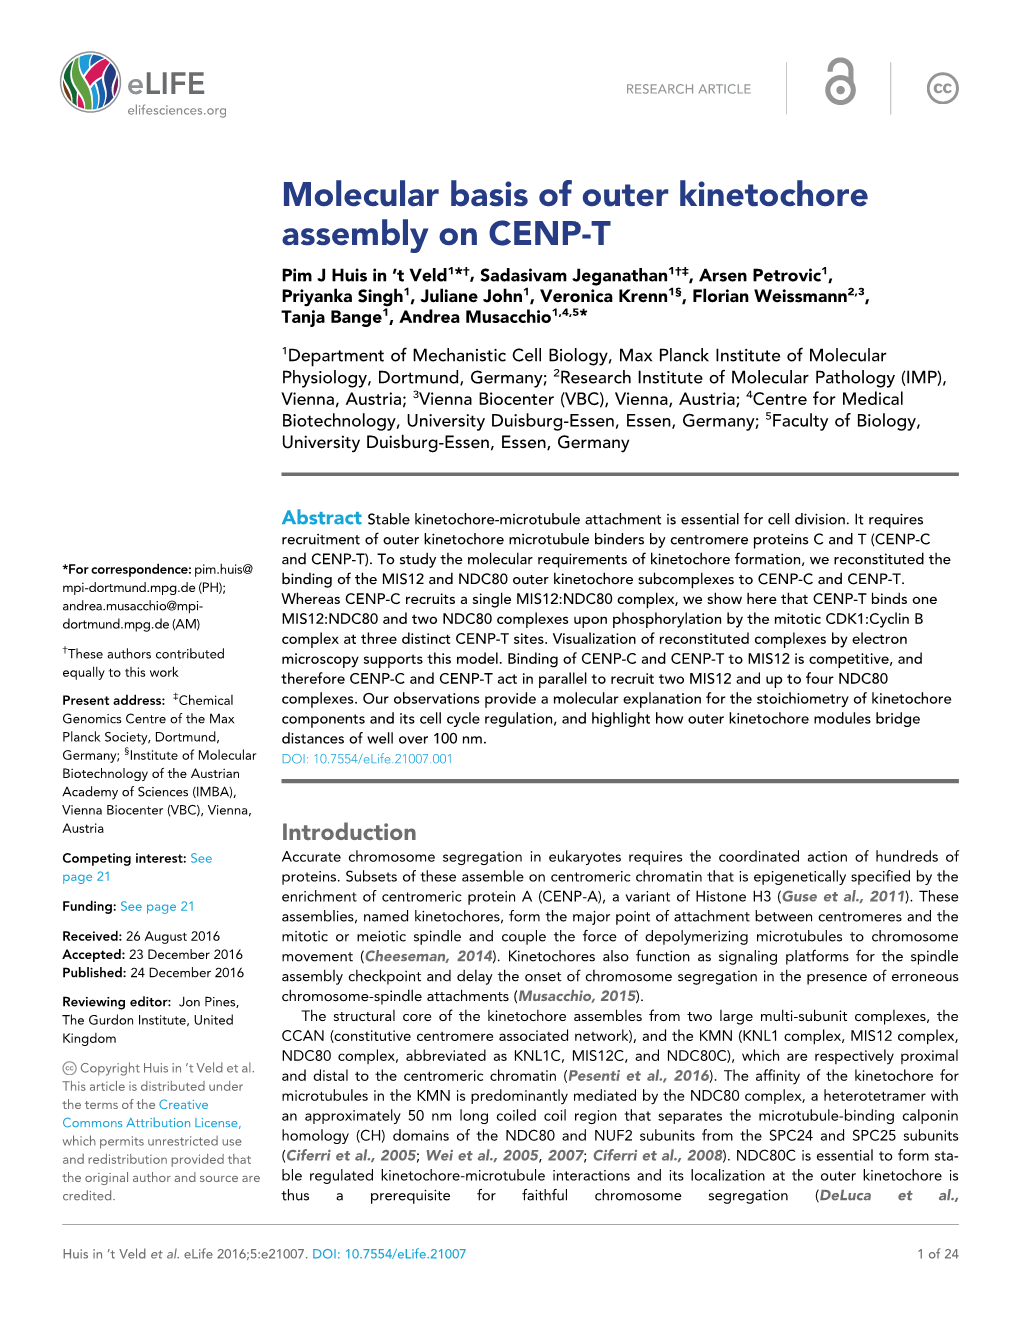 Molecular Basis of Outer Kinetochore Assembly on CENP-T